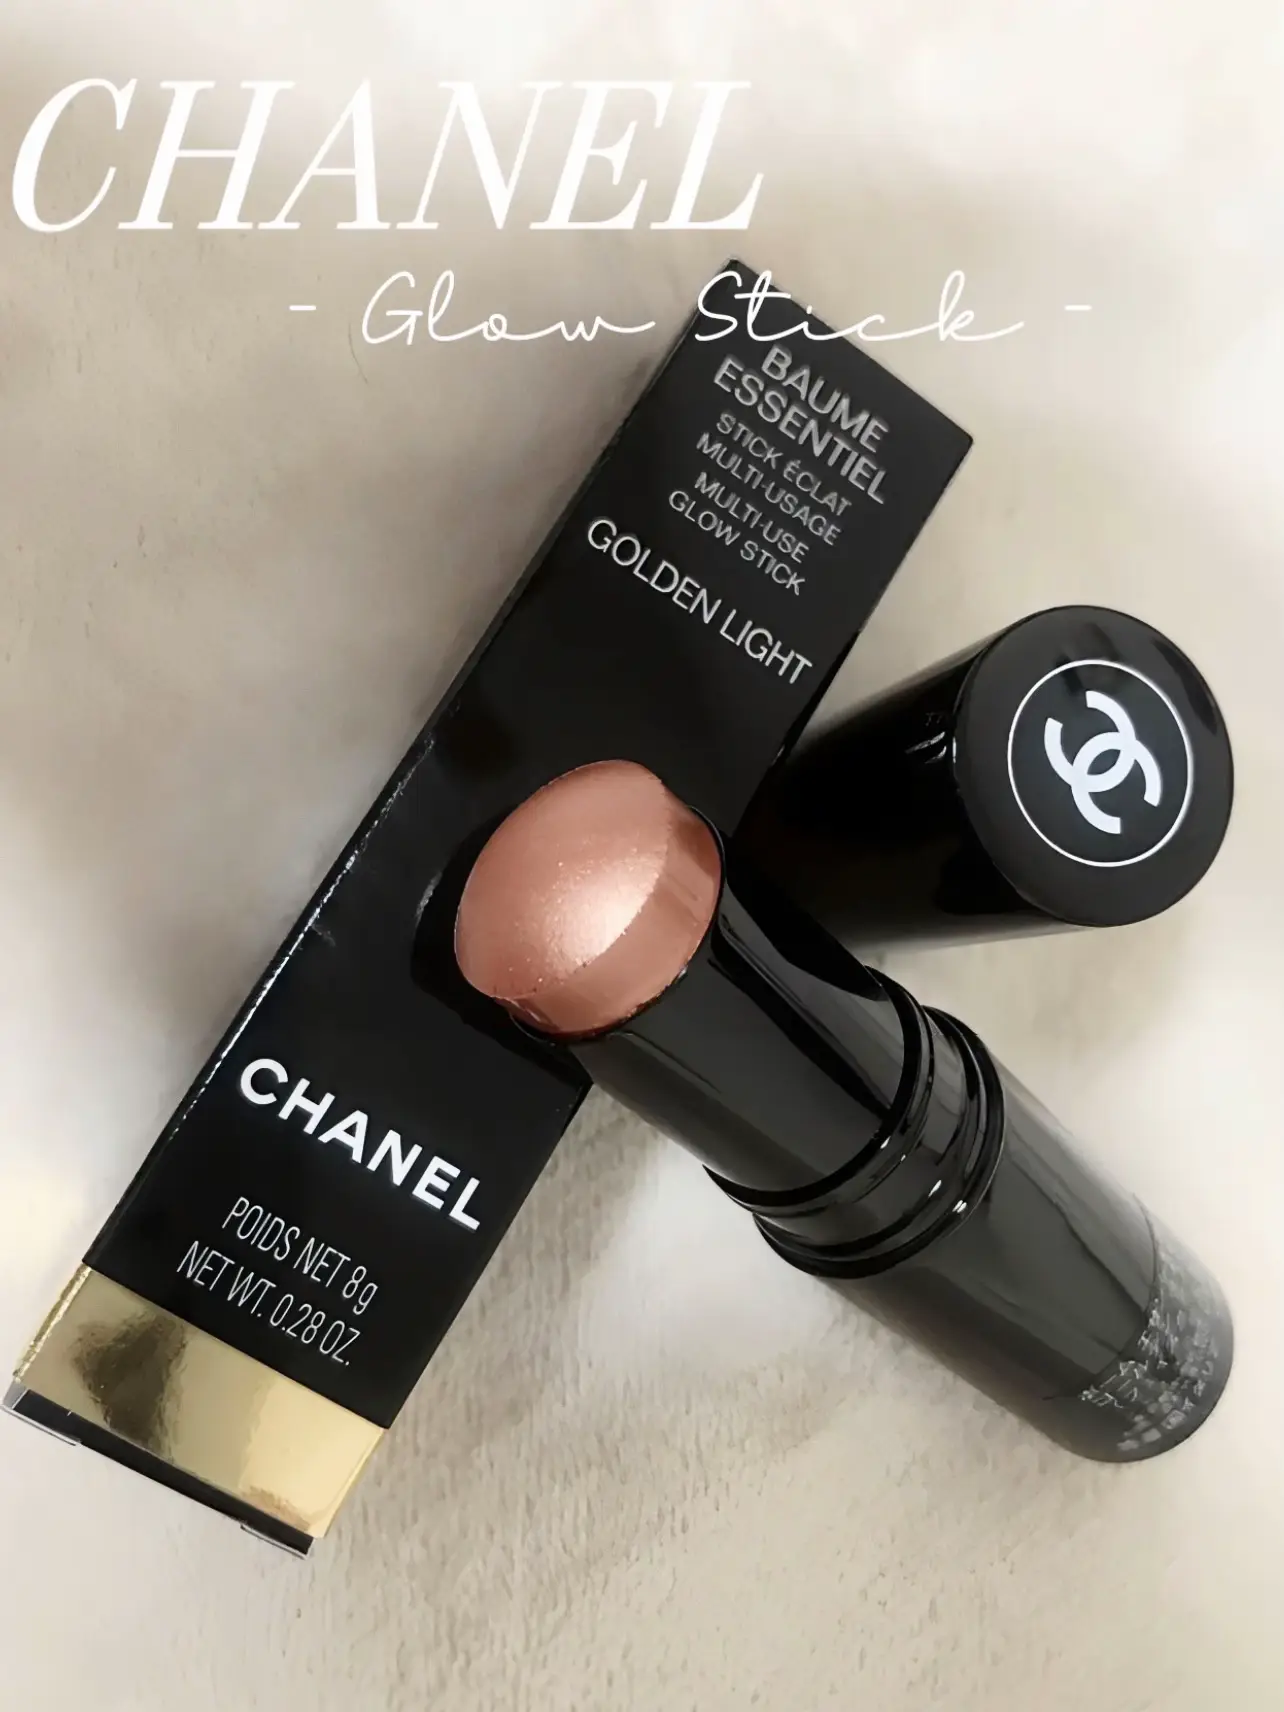 Multi-Use Glow Stick from chanel ✨, Gallery posted by syazaimeka